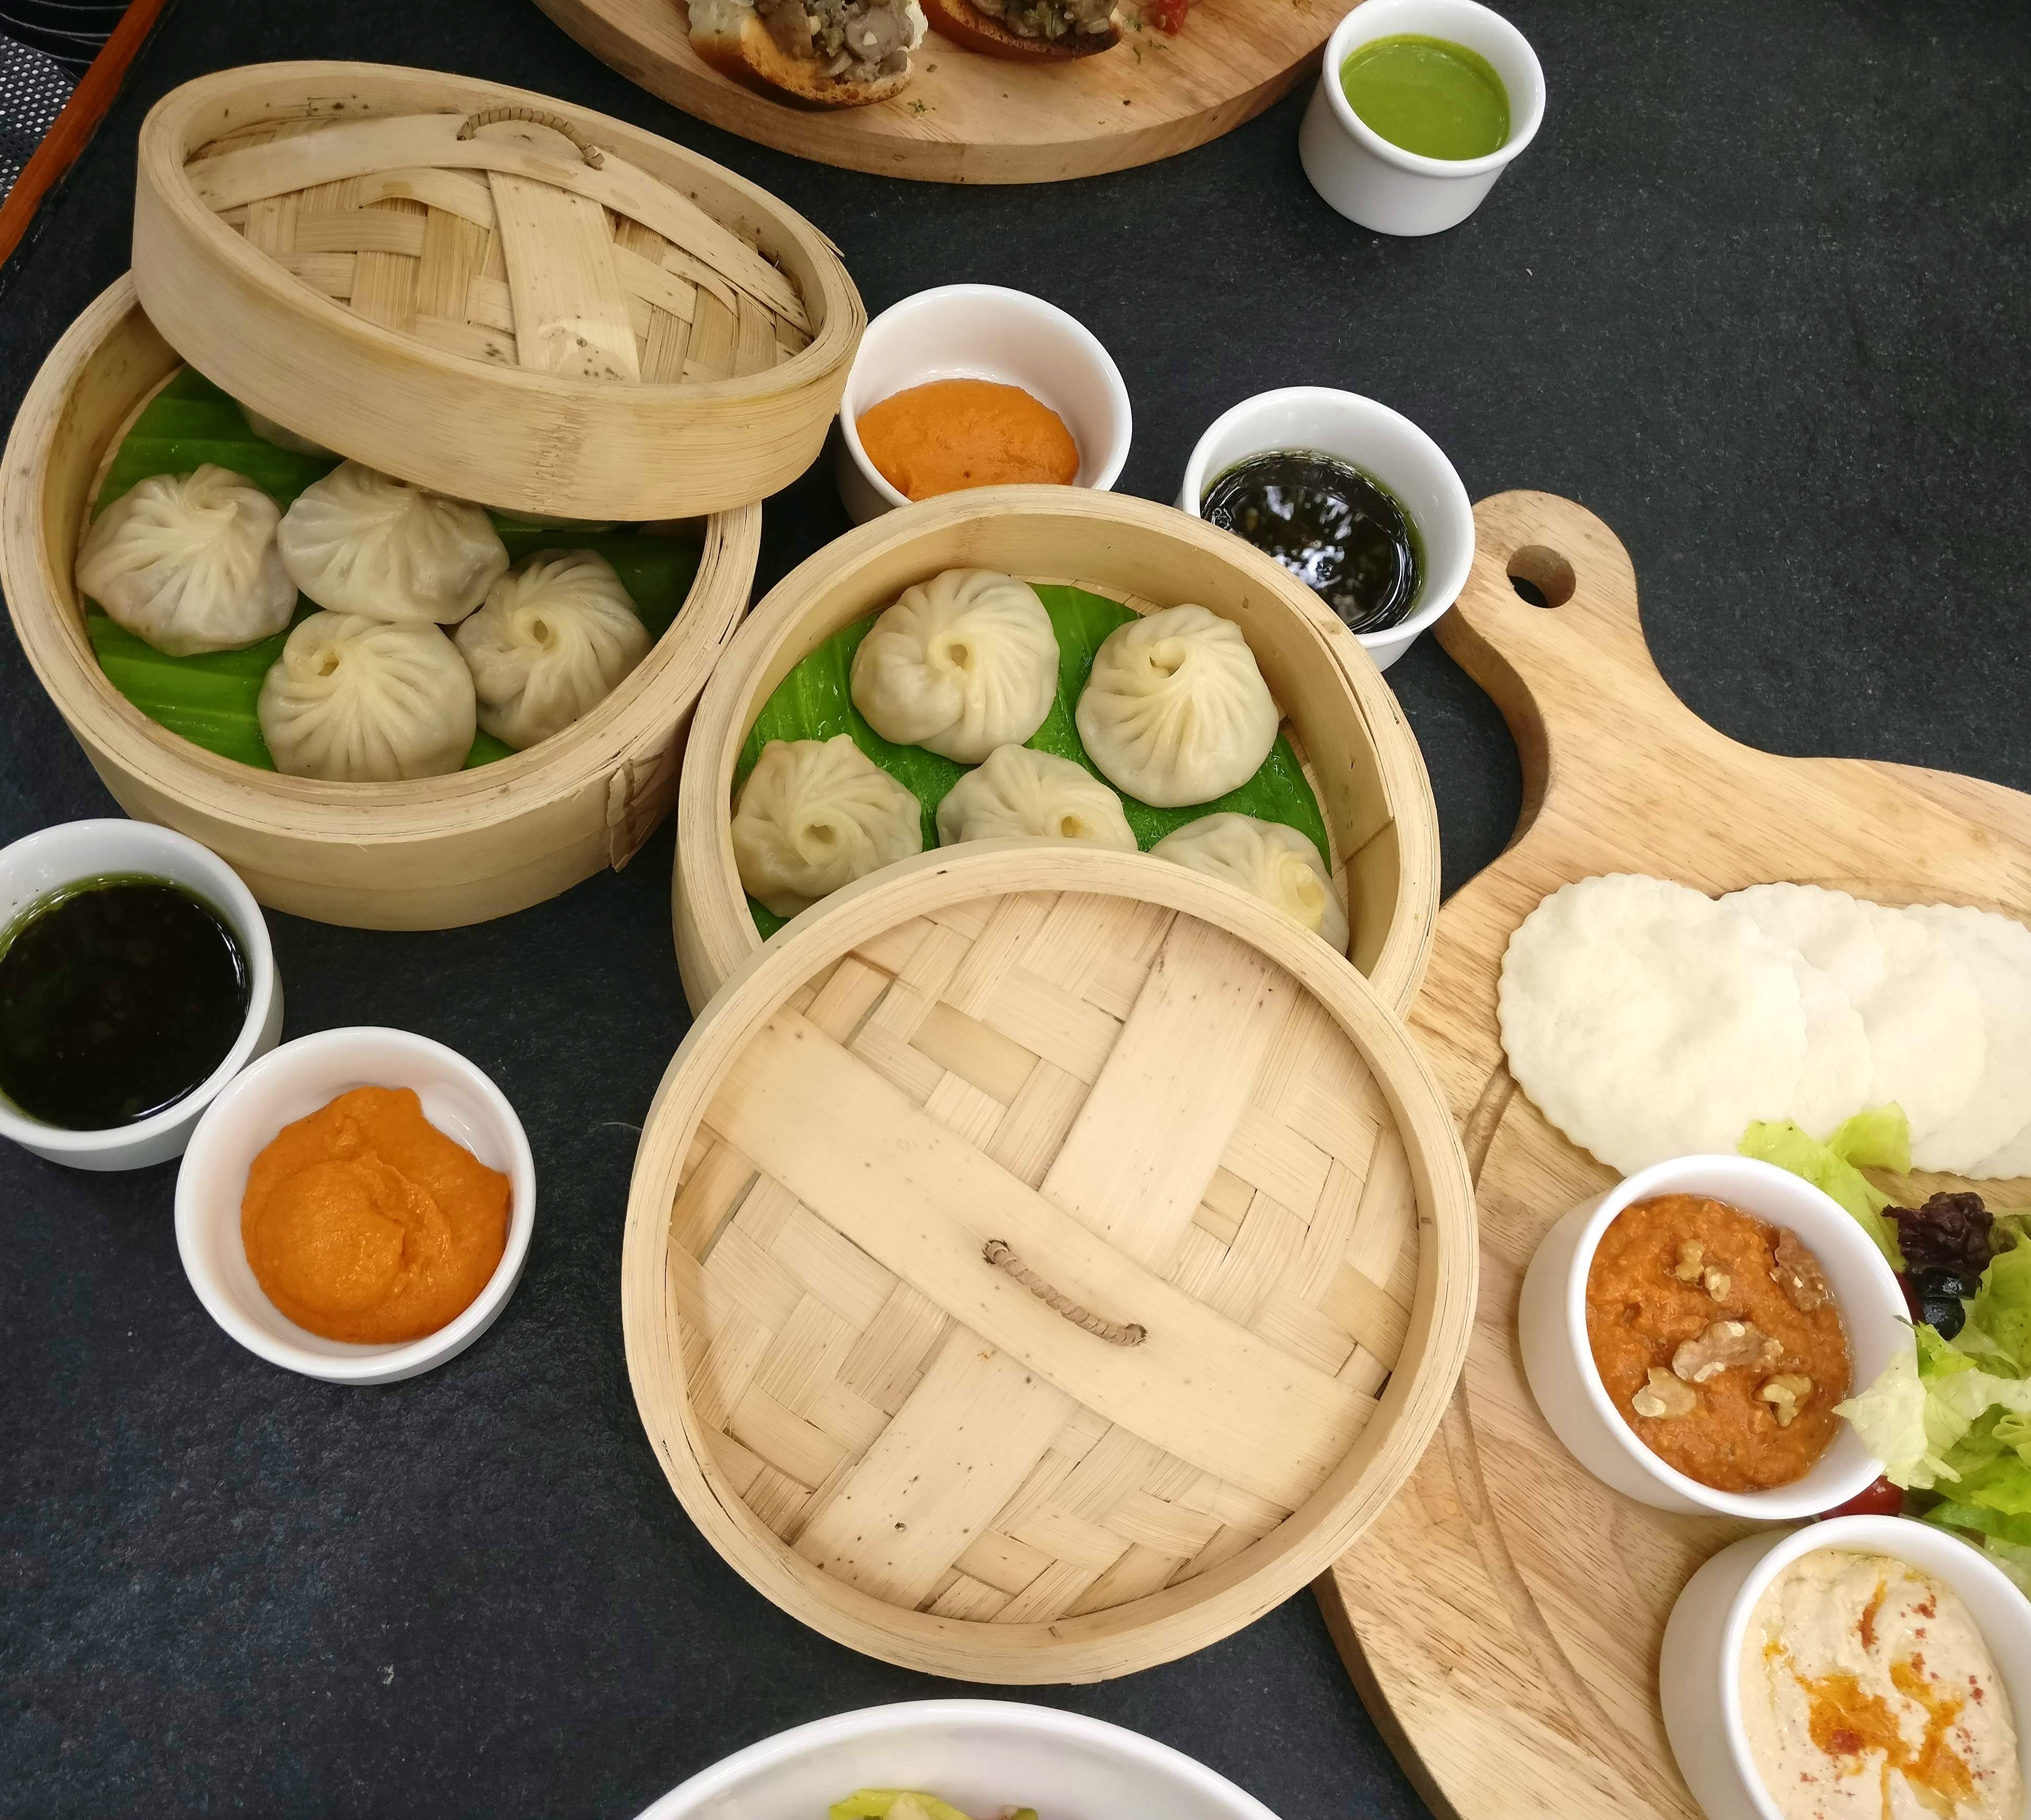 Dish,Food,Cuisine,Ingredient,Meal,Dim sum,Chinese food,Lunch,Produce,Bowl